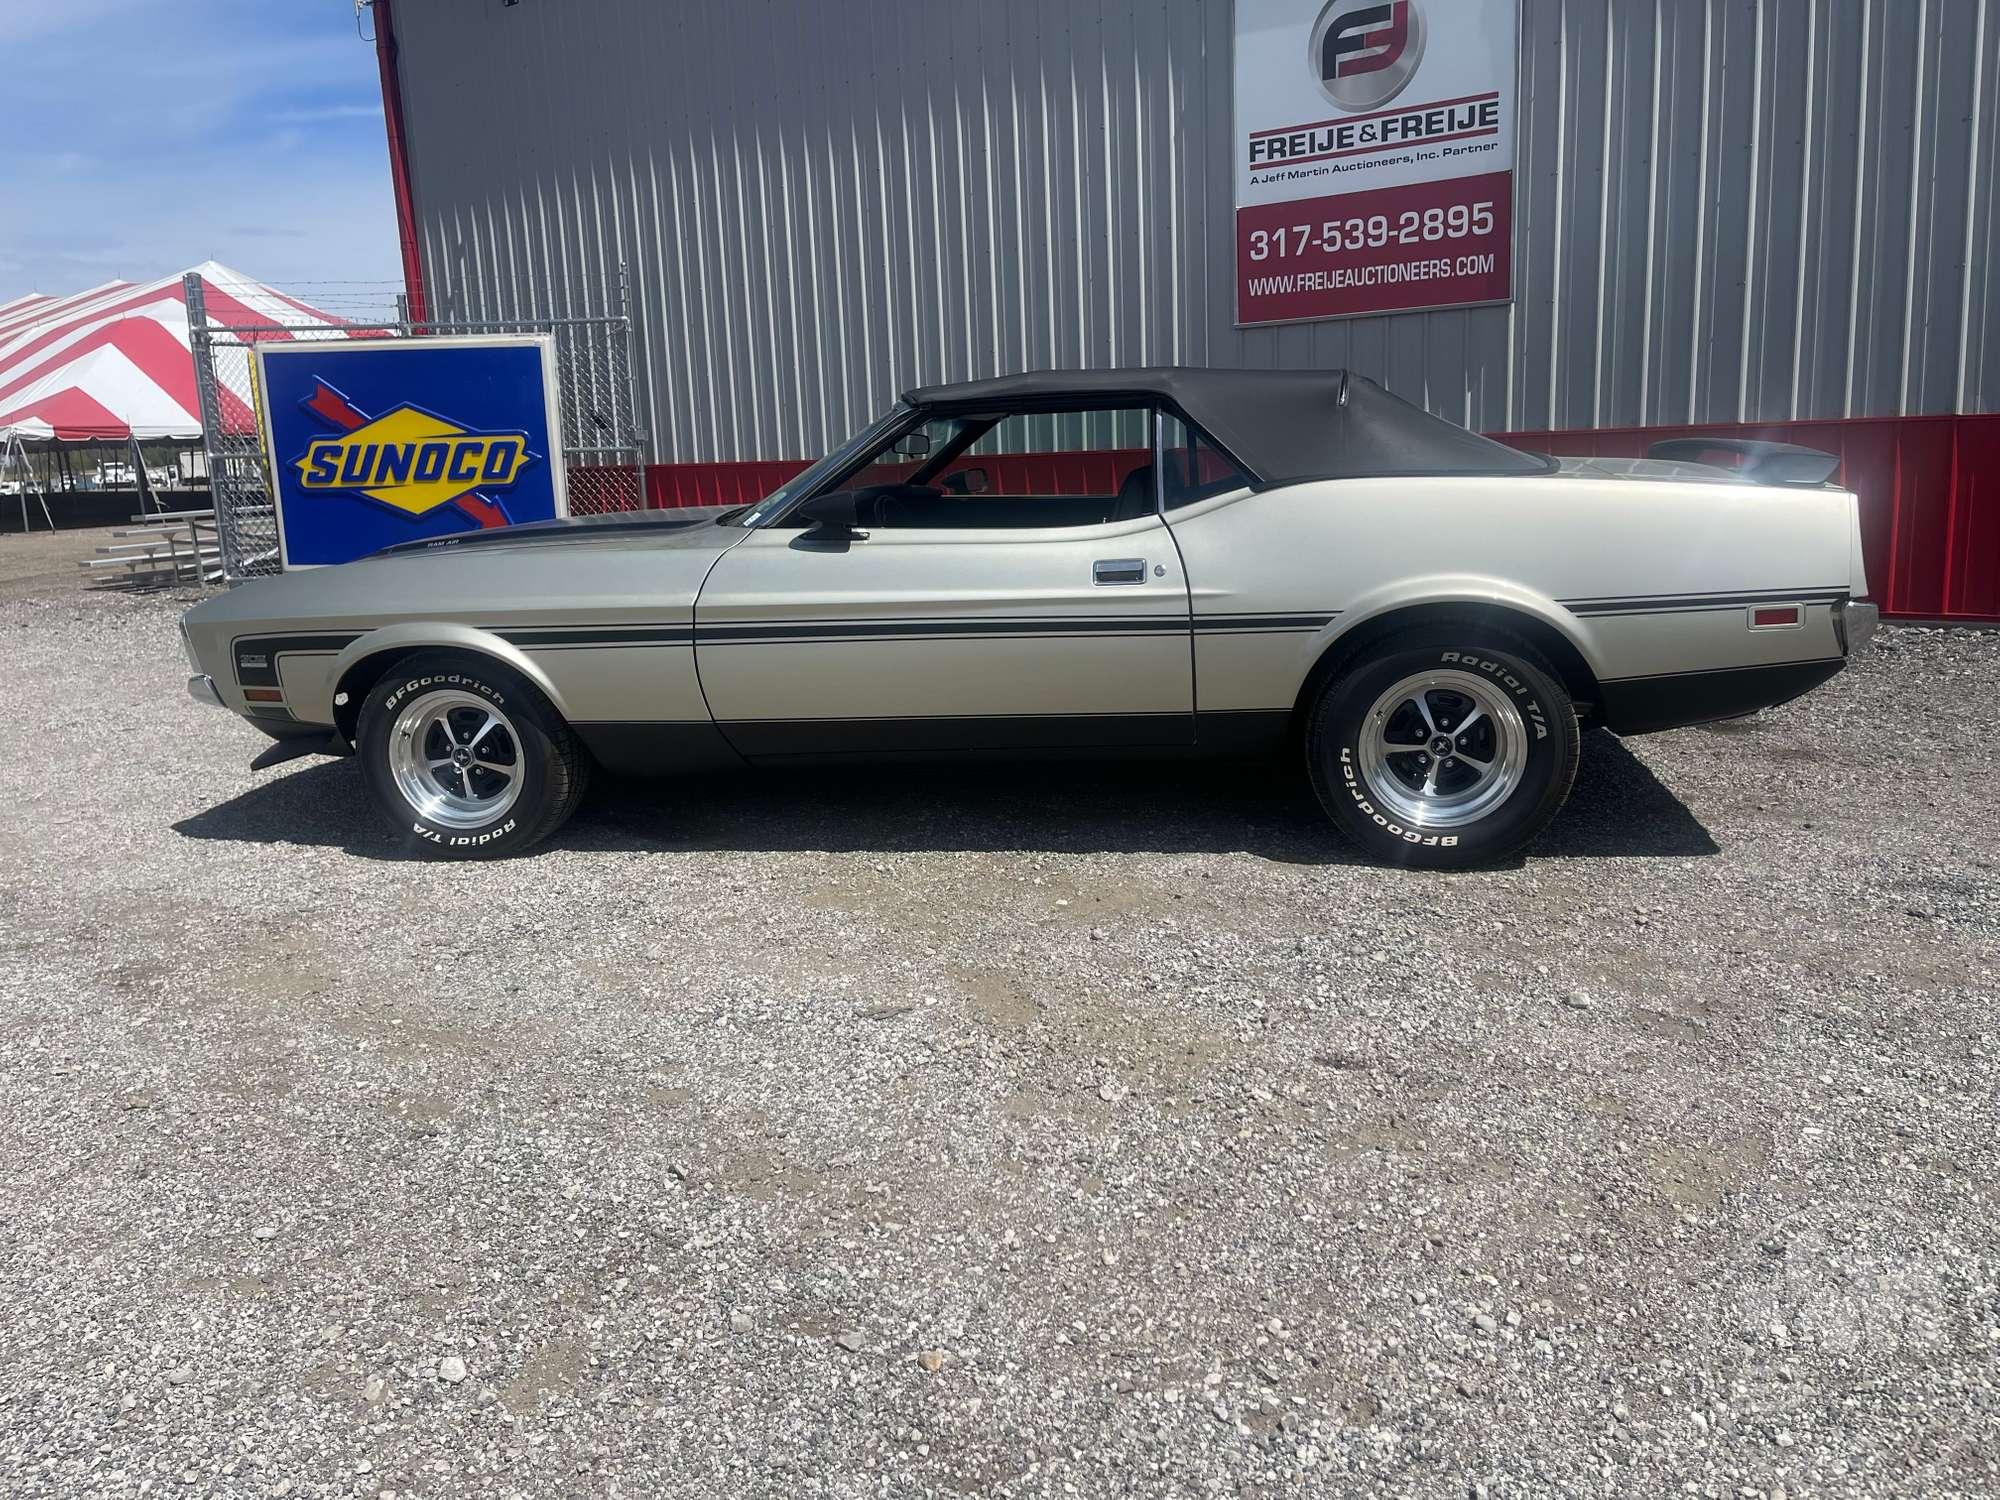 1971 FORD MUSTANG VIN: 1F03F166849 CONVERTIBLE